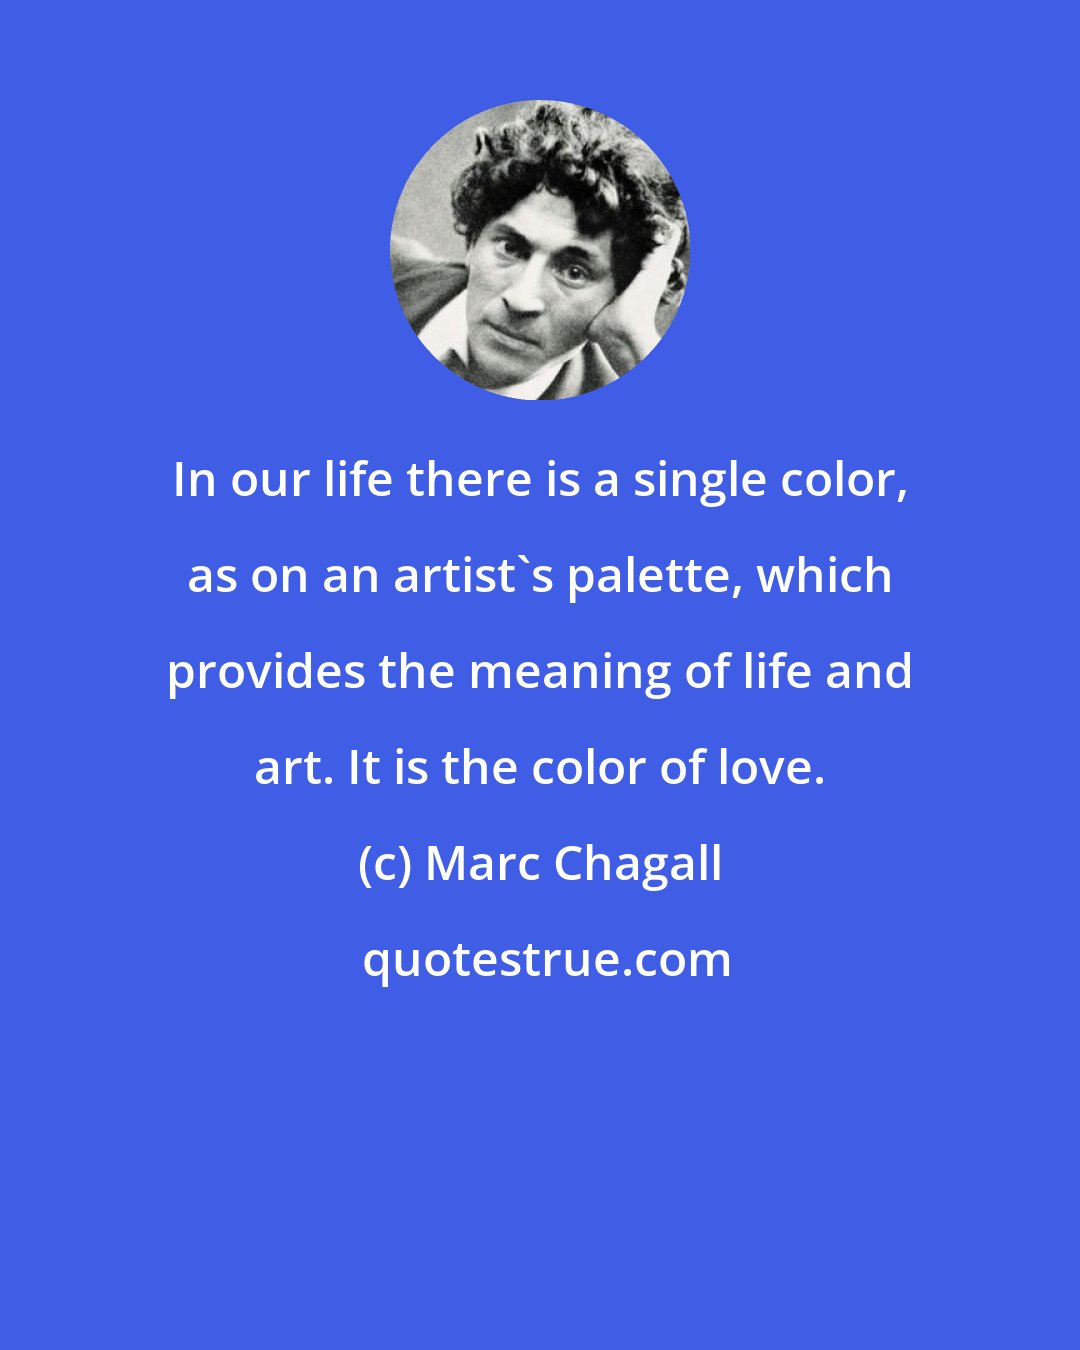 Marc Chagall: In our life there is a single color, as on an artist's palette, which provides the meaning of life and art. It is the color of love.